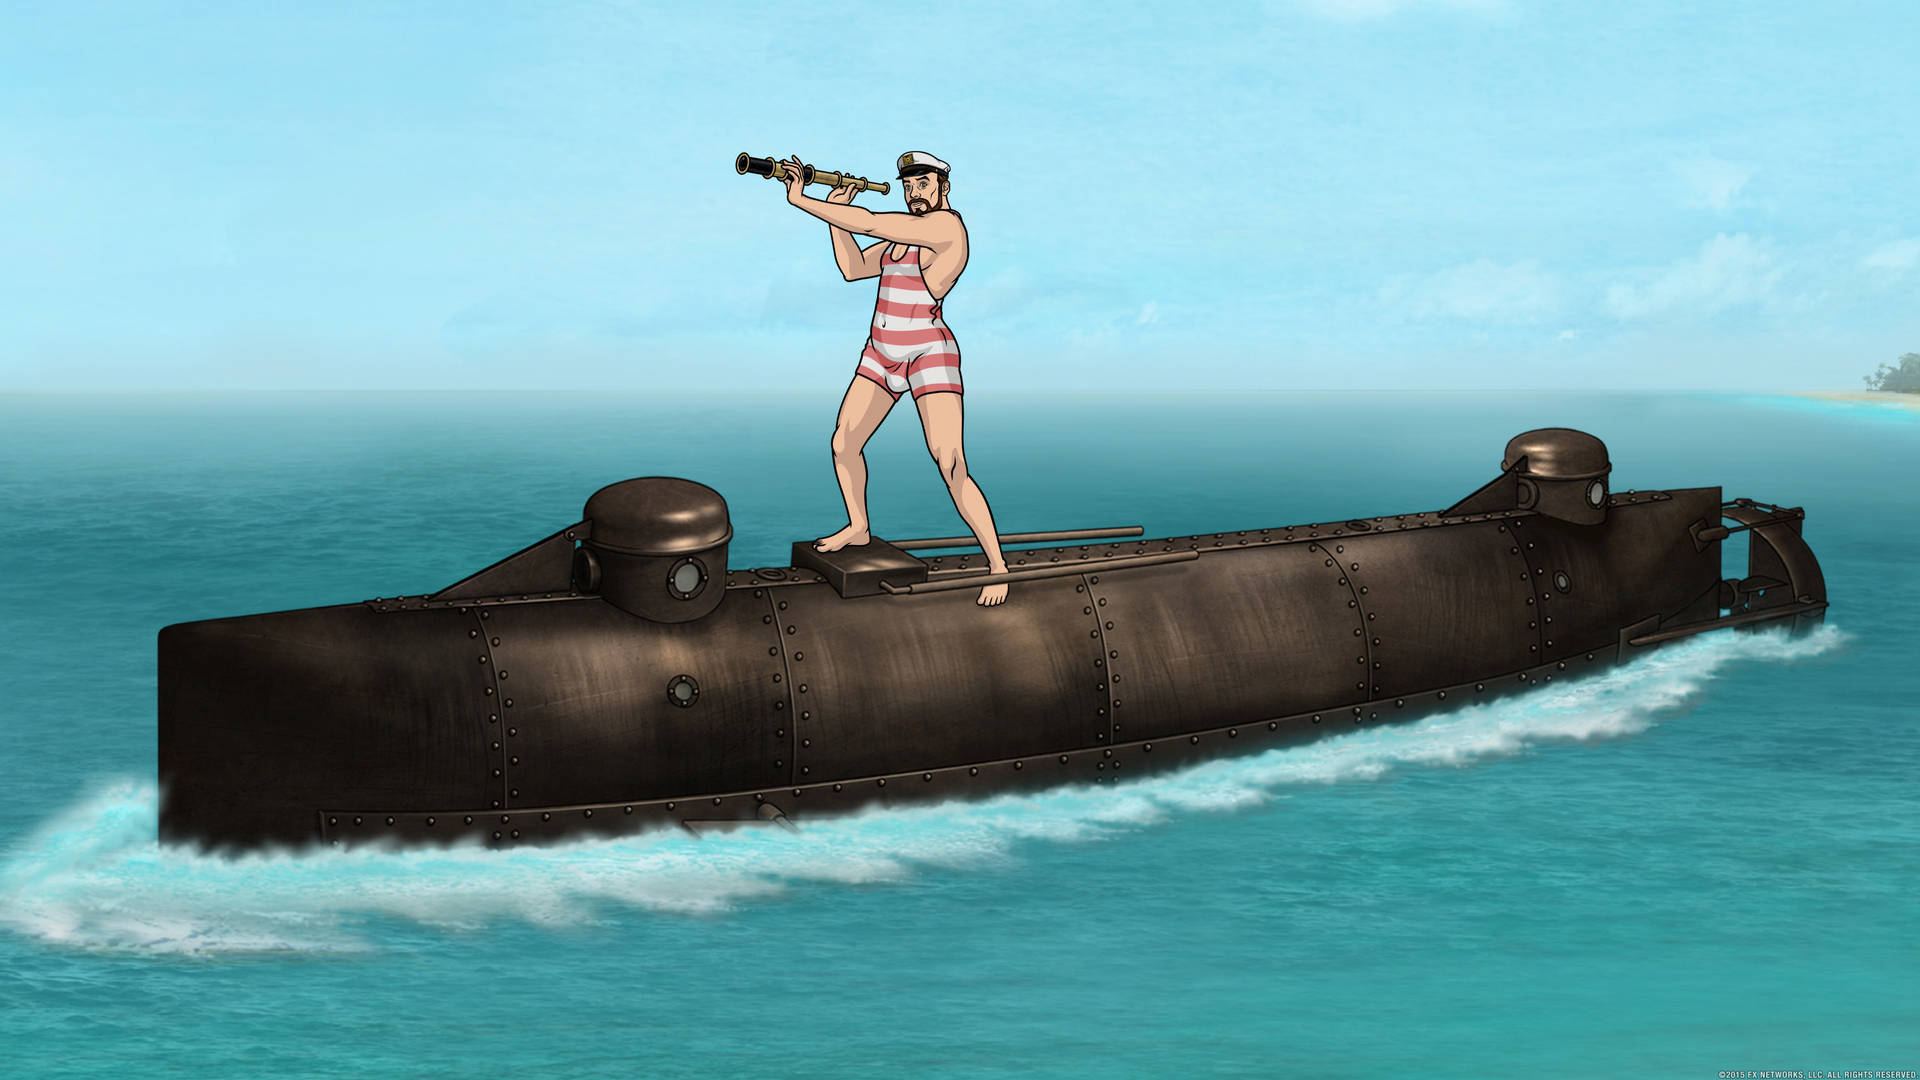 Eccentric Spy Sterling Archer With Dr. Krieger Aboard A Submarine